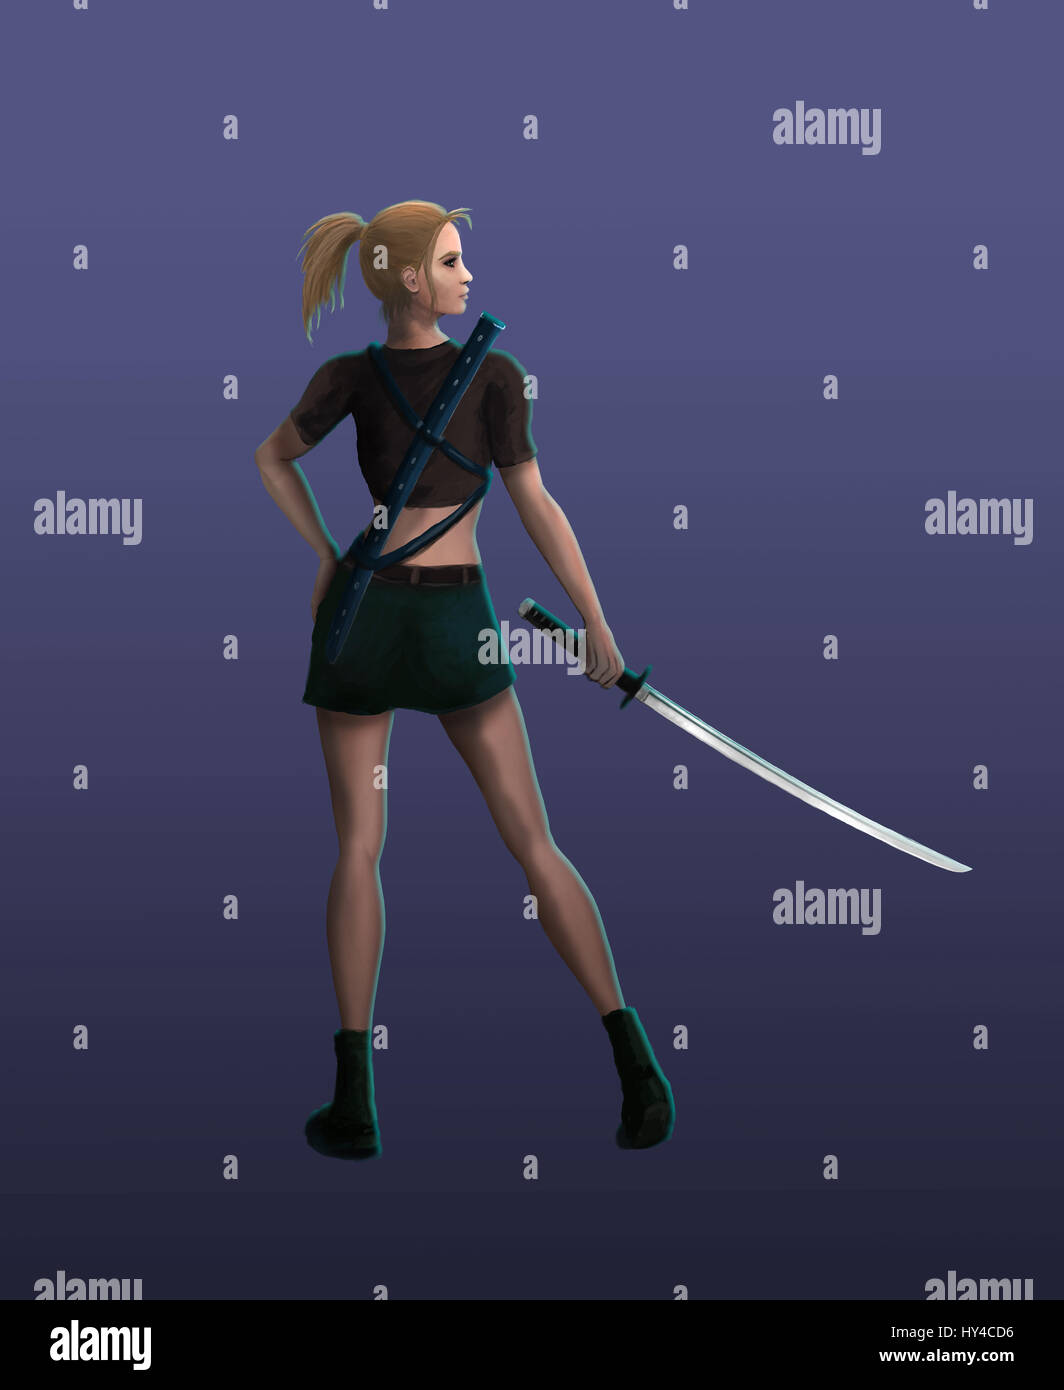 The Samurai girl stands in a menacing stance Stock Photo